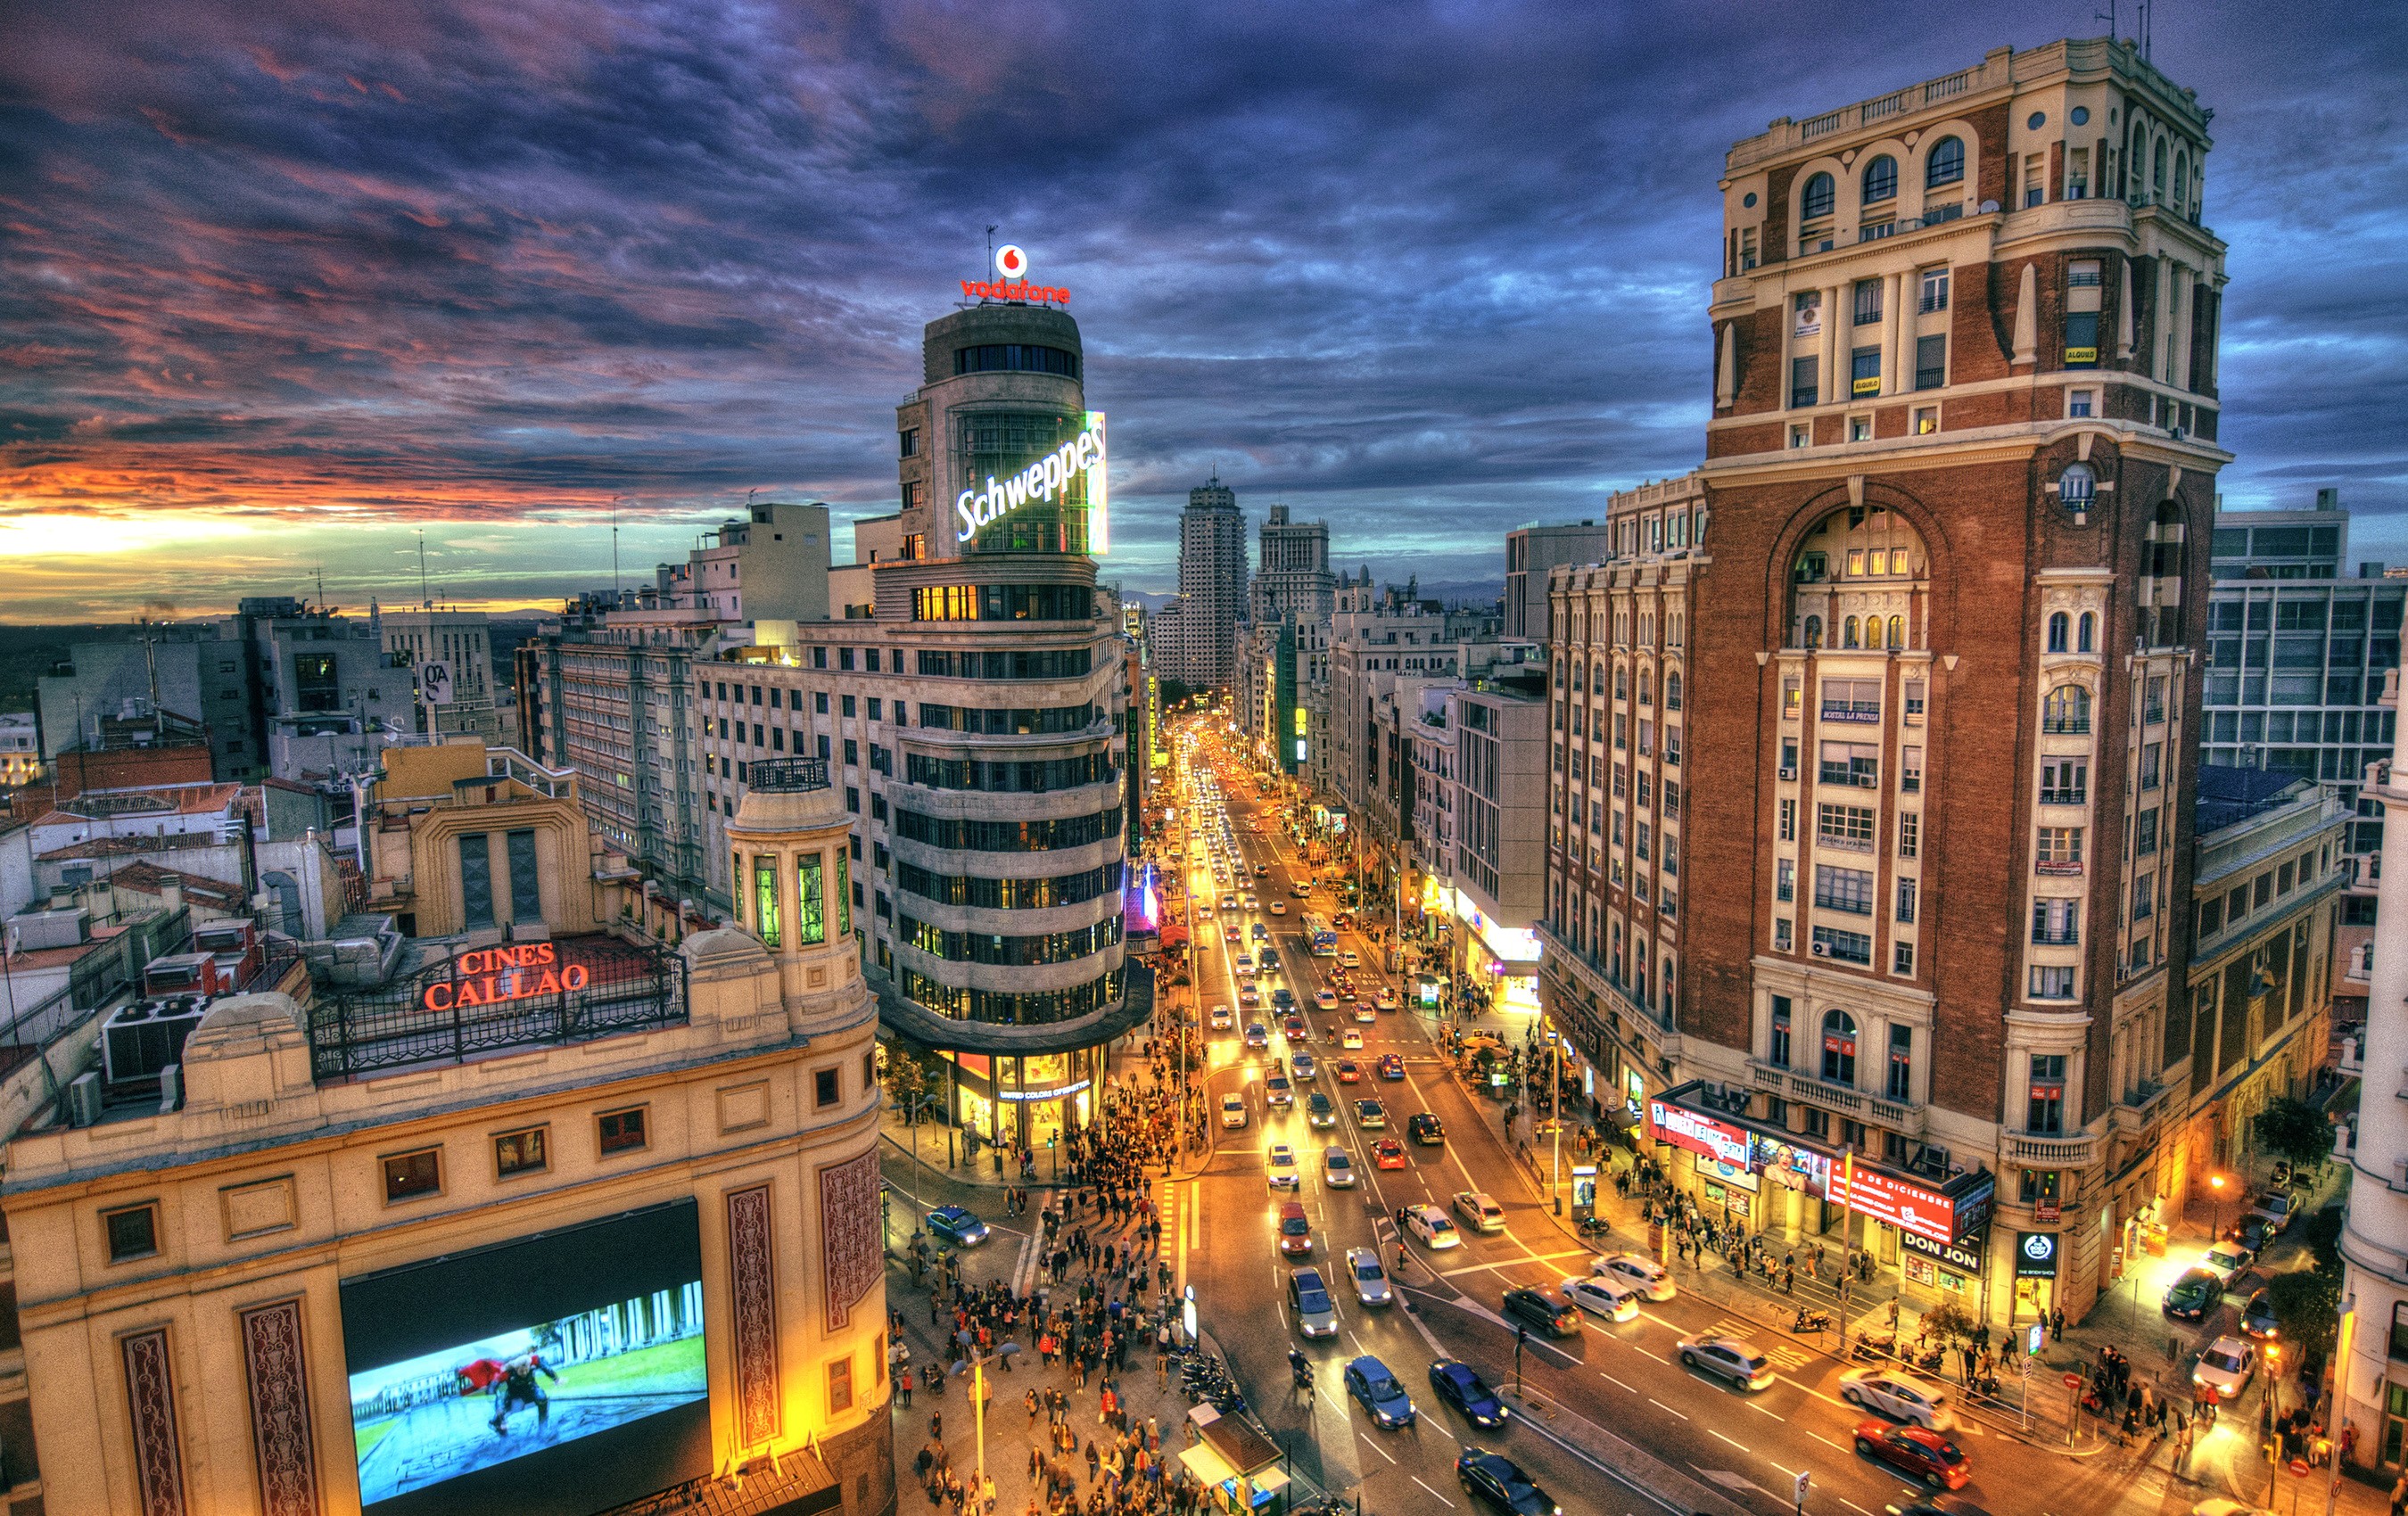 Road Sky Clouds Sunset Lights Evening Spain Street Madrid Cityscape HDR 2700x1700